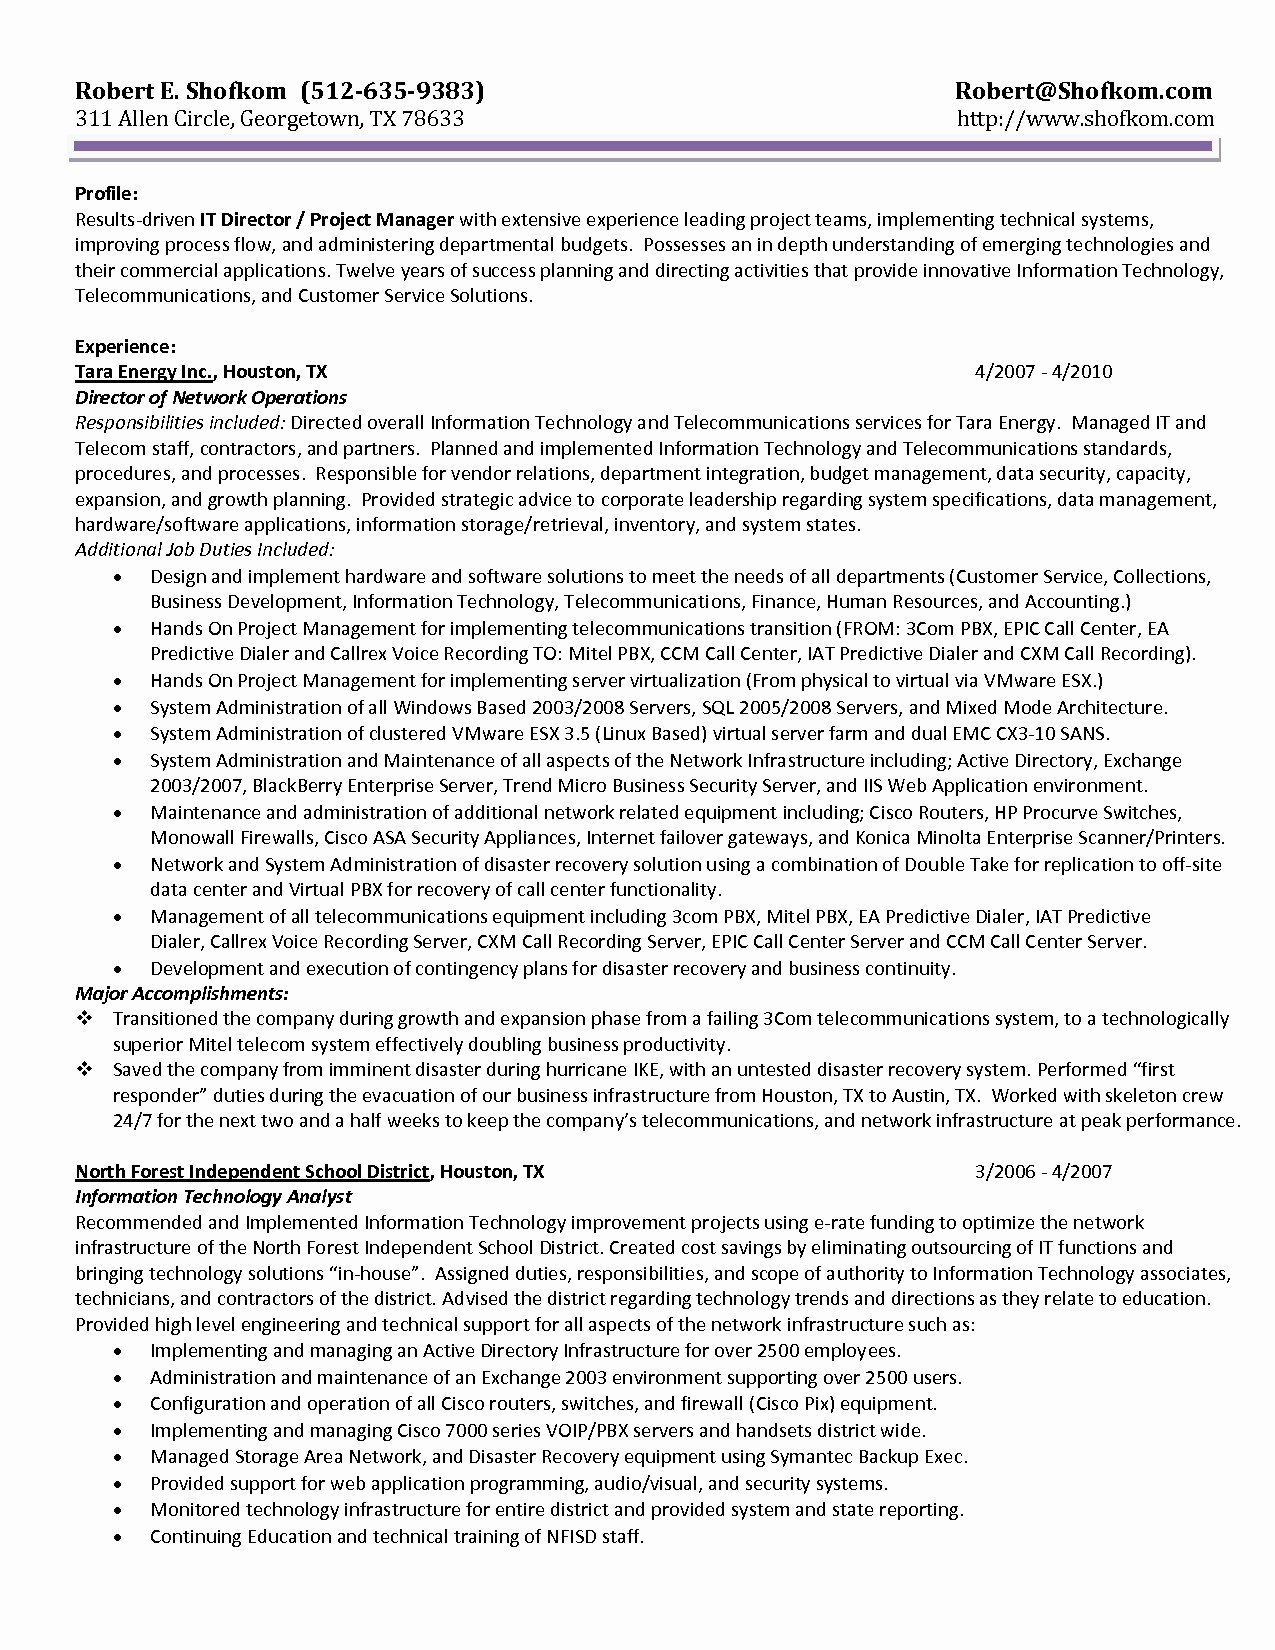 Information Technology Manager Resume